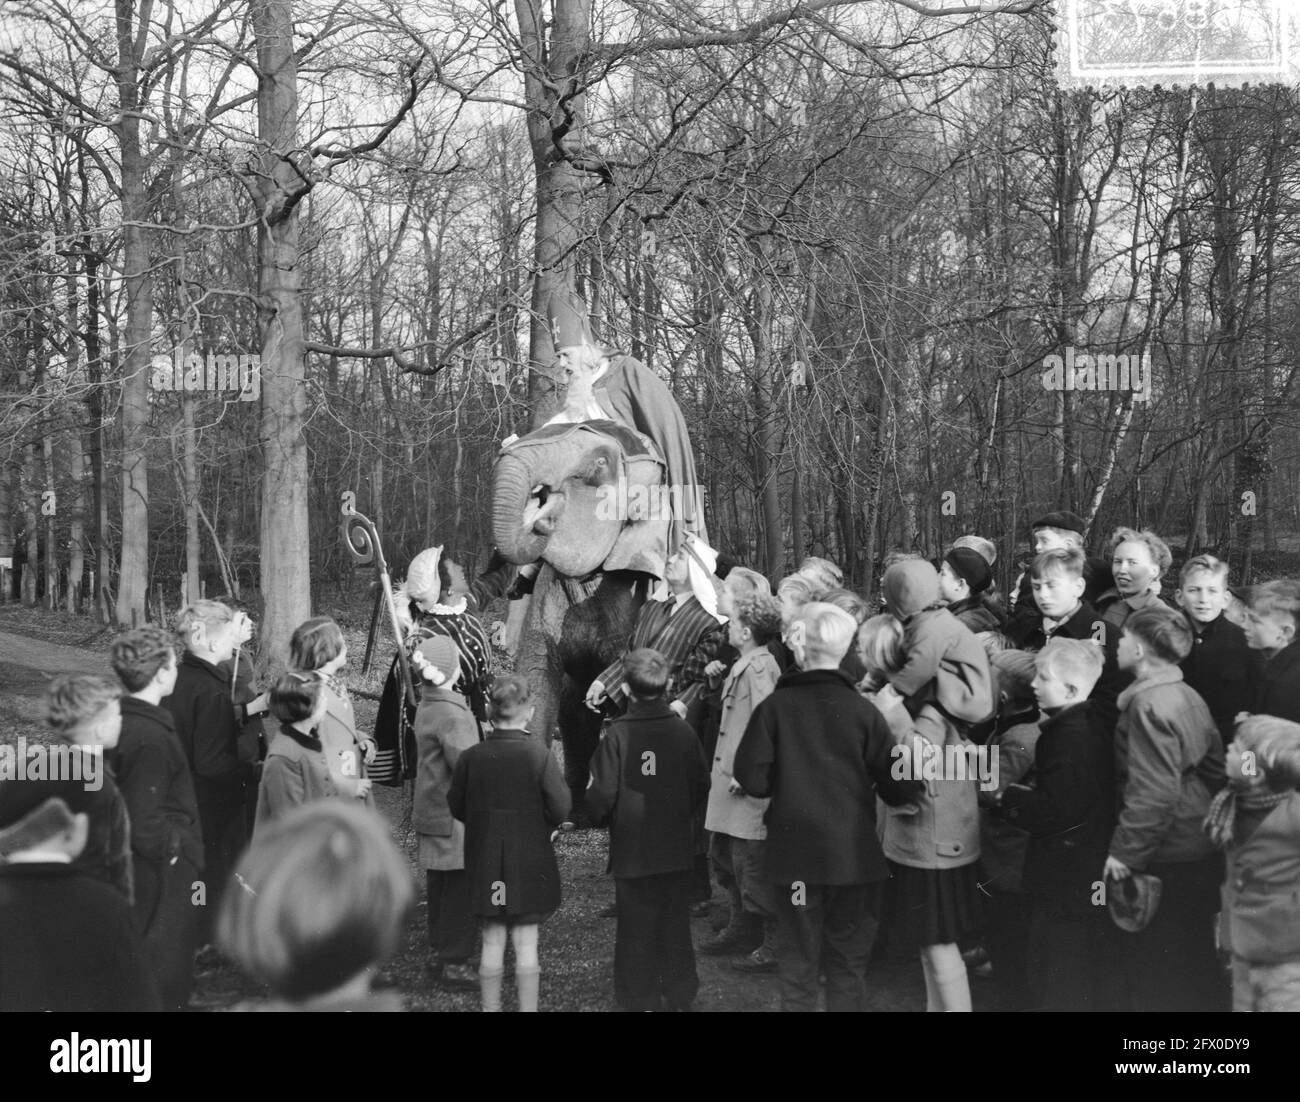 Saint Nicholas on elephant visits Chemical Factory Naarden, December 1, 1954, OLIFANTS, The Netherlands, 20th century press agency photo, news to remember, documentary, historic photography 1945-1990, visual stories, human history of the Twentieth Century, capturing moments in time Stock Photo